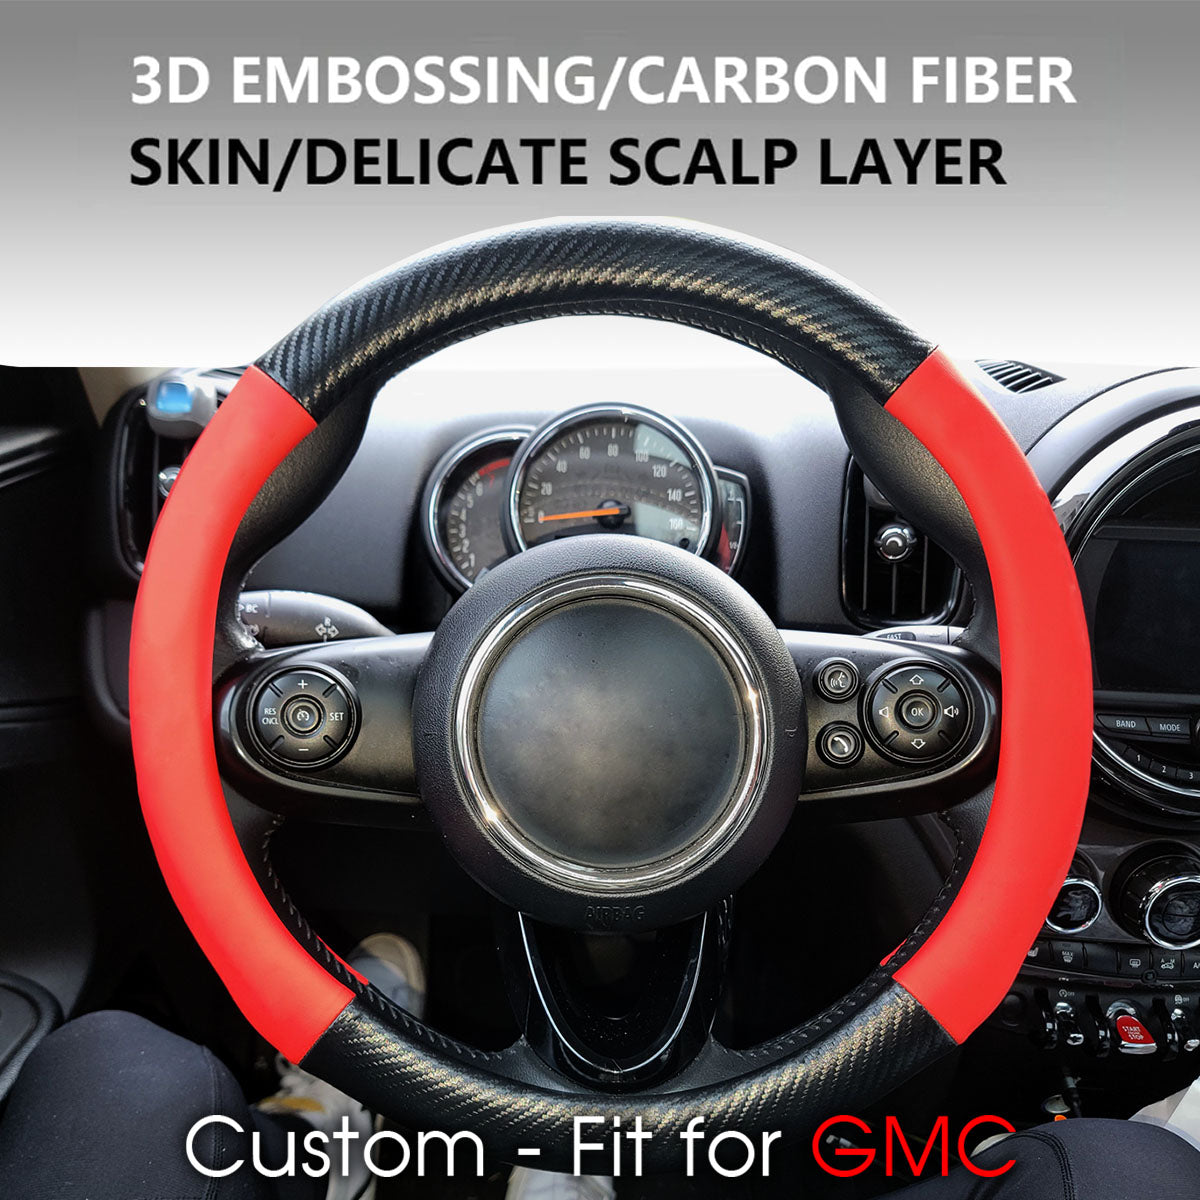 Car Steering Wheel Cover, Custom-Fit For Cars, Leather Nonslip 3D Carbon Fiber Texture Sport Style Wheel Cover for Women, Interior Modification for All Car Accessories DLWQ225